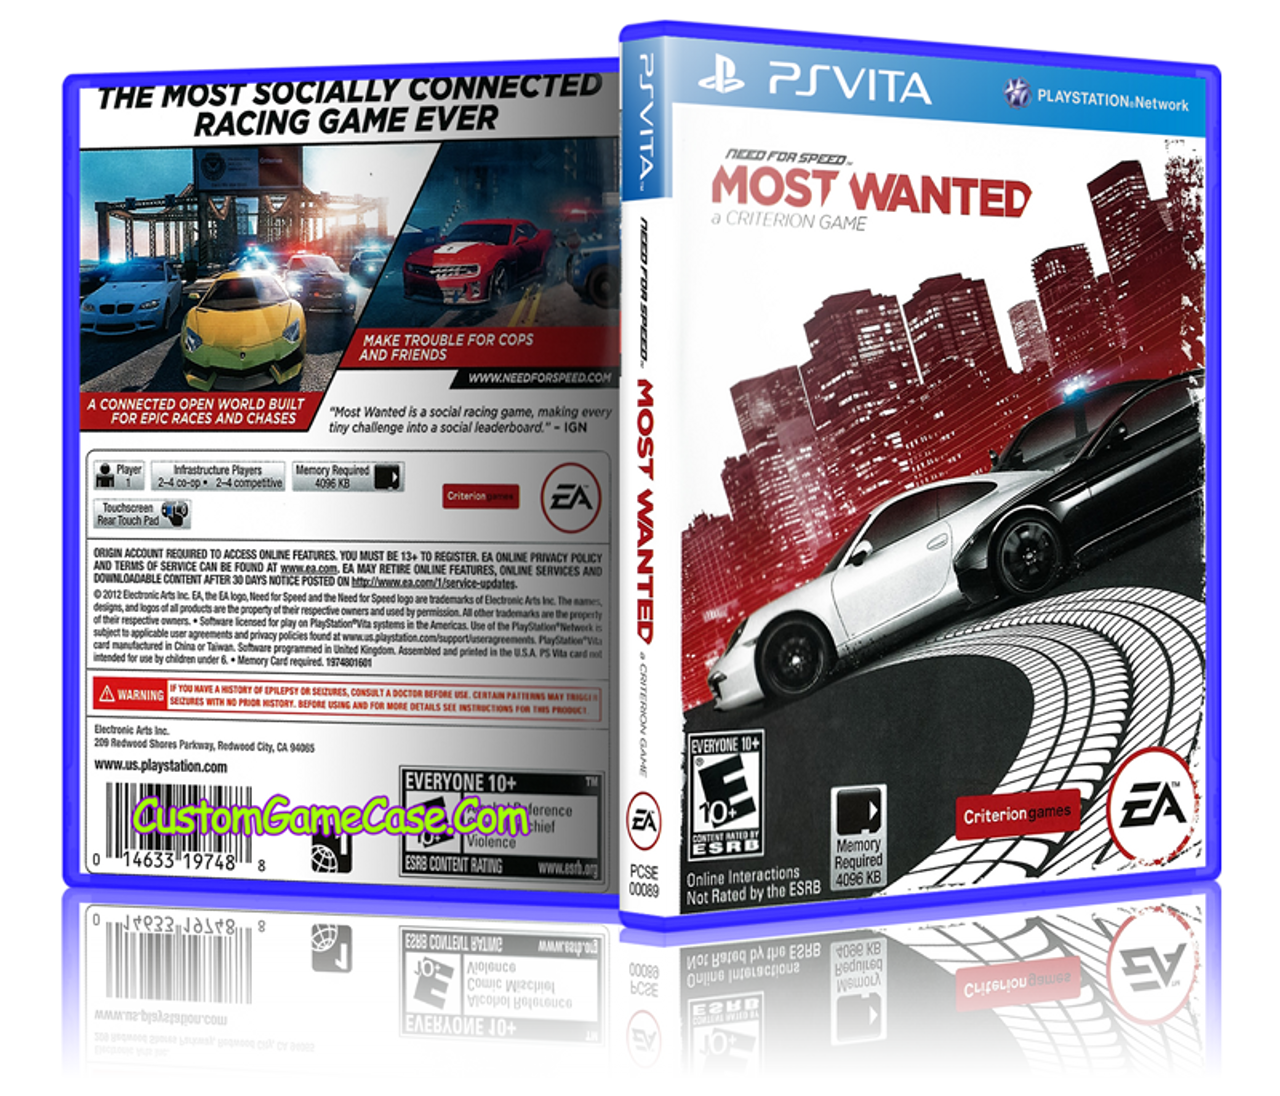 Need for Speed Most Wanted - IGN